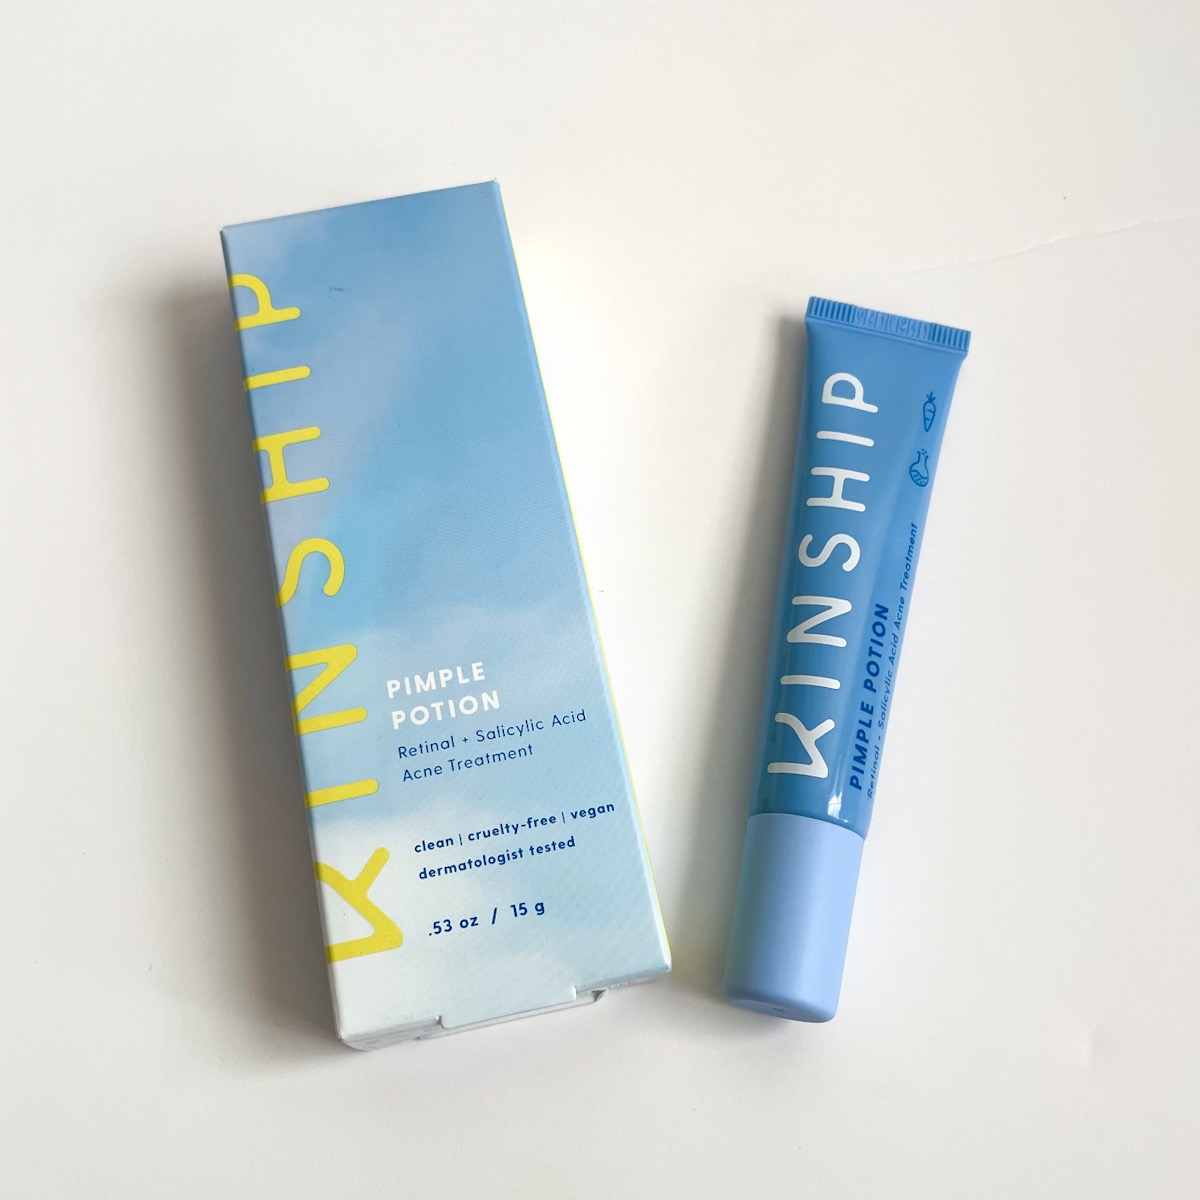 blue tube of acne treatment next to blue and yellow box